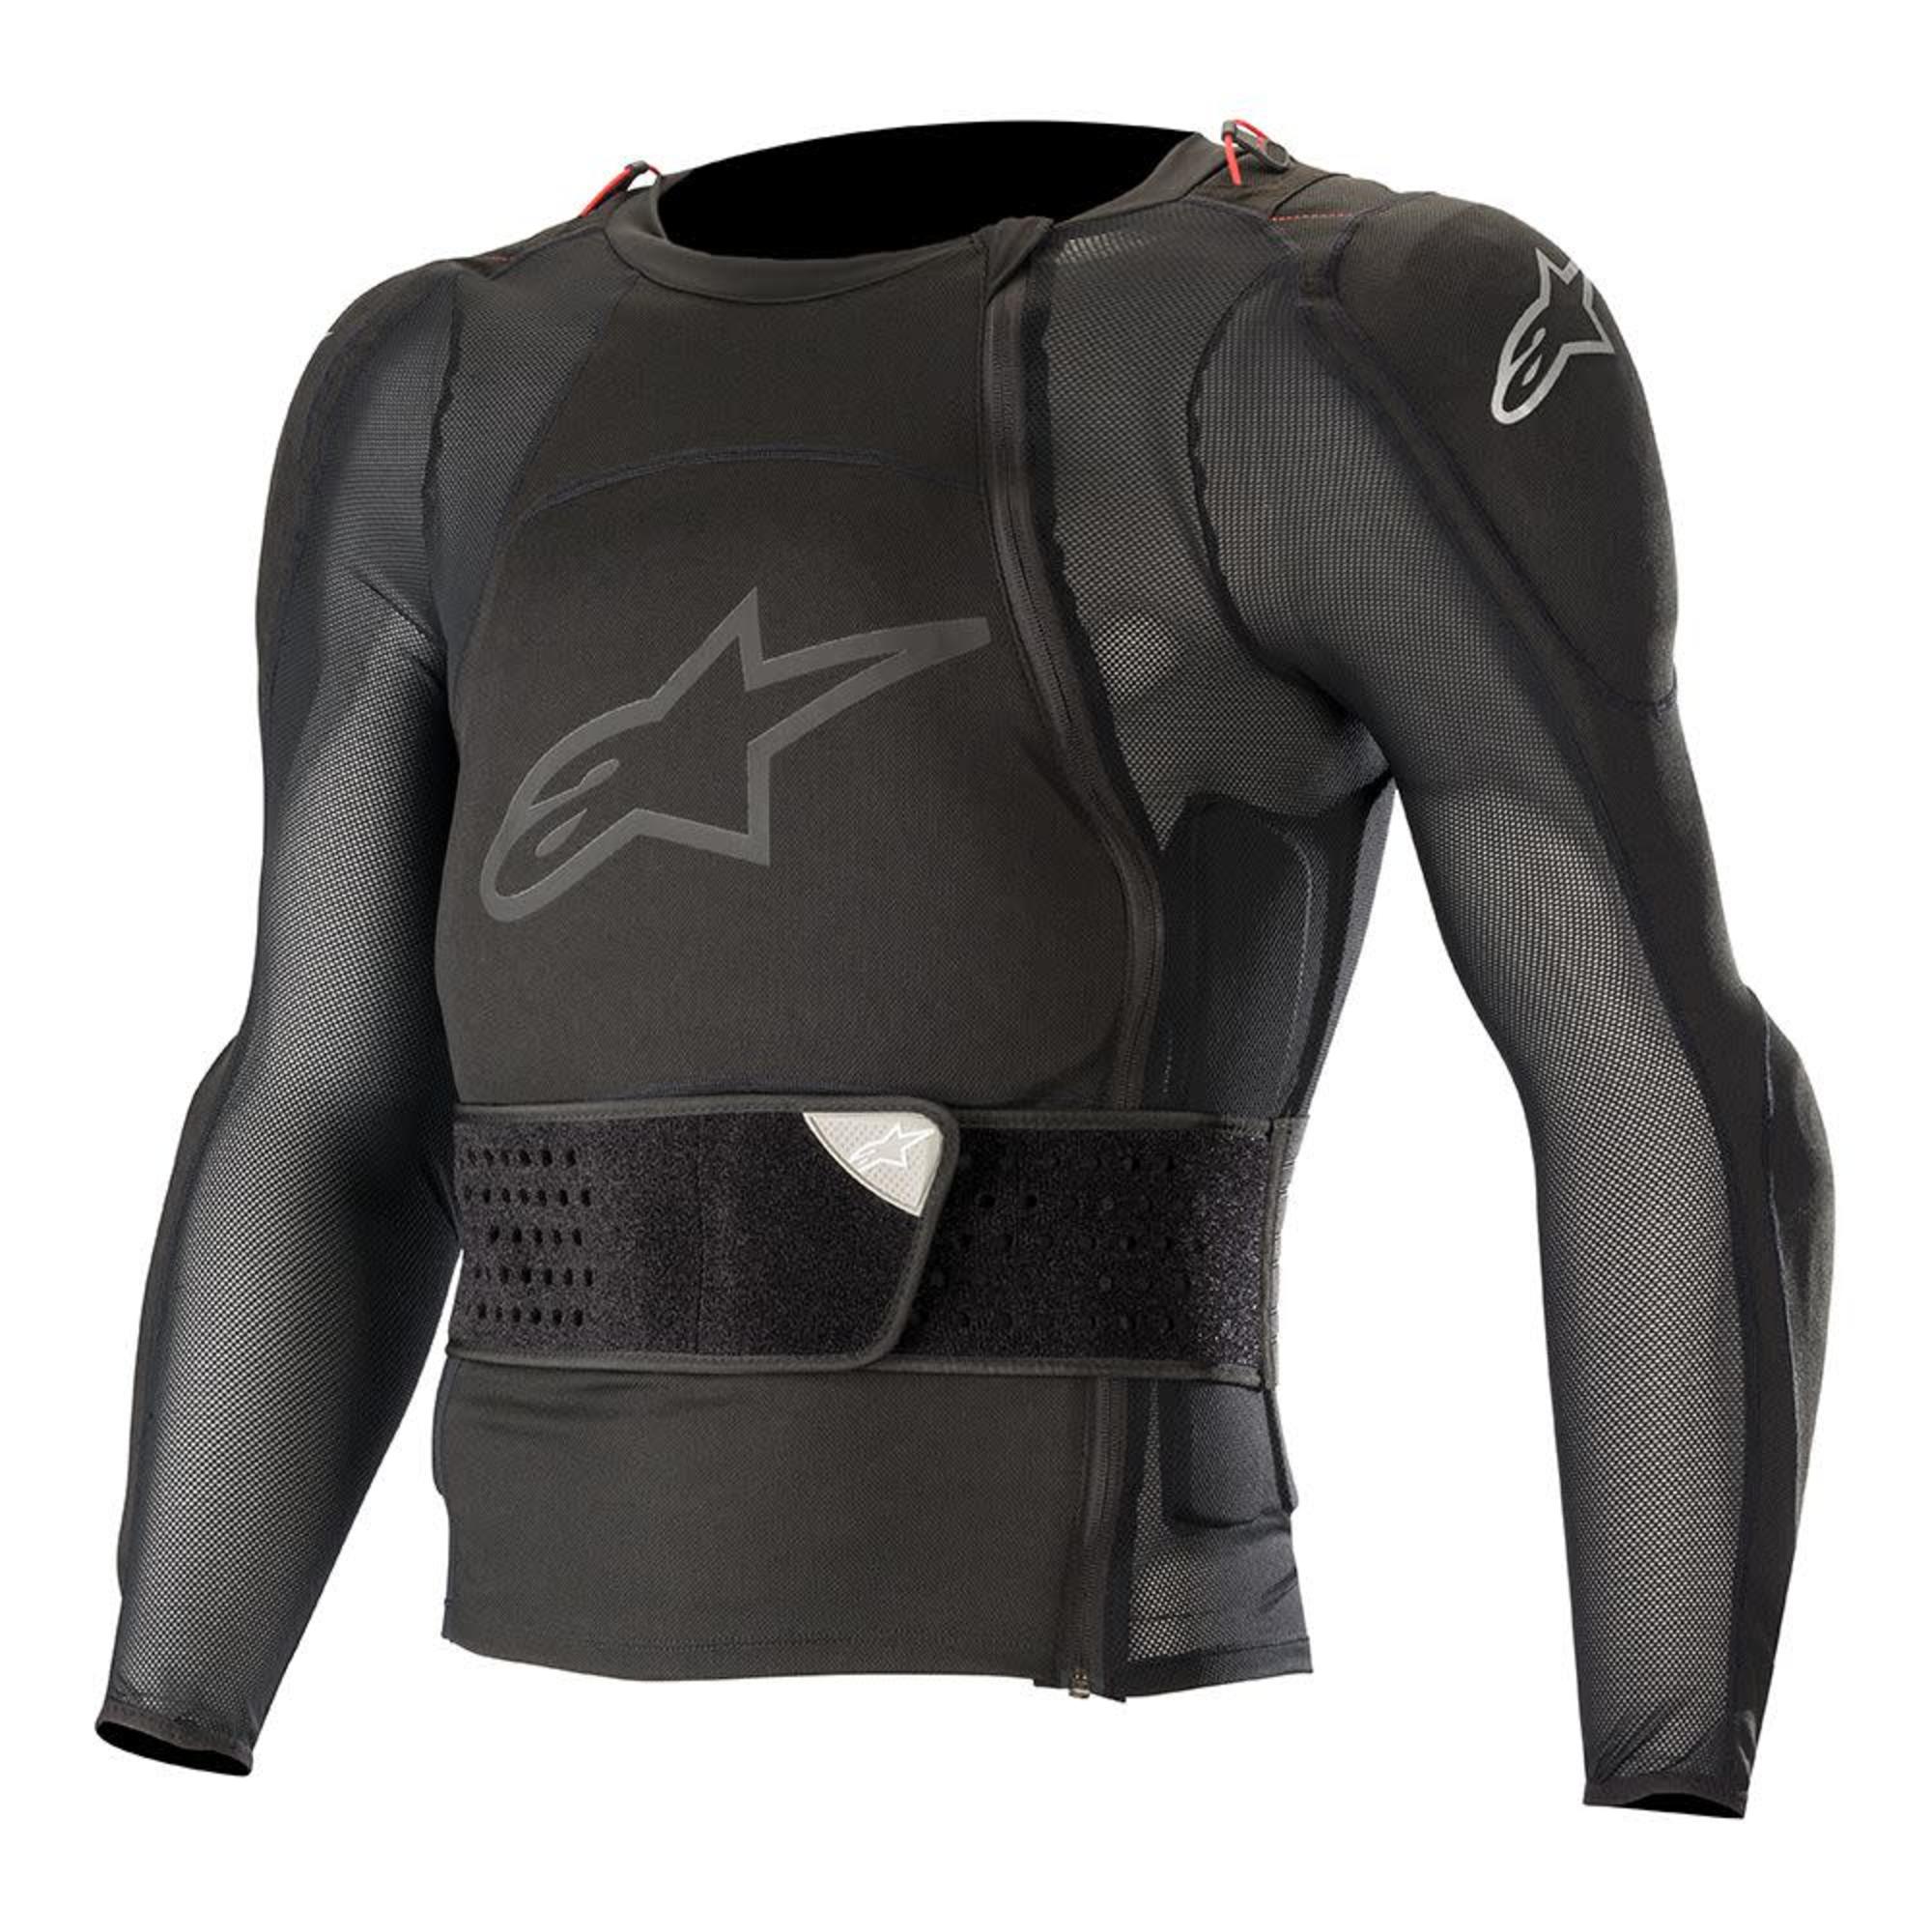 alpinestars protection protections for men sequence body armor